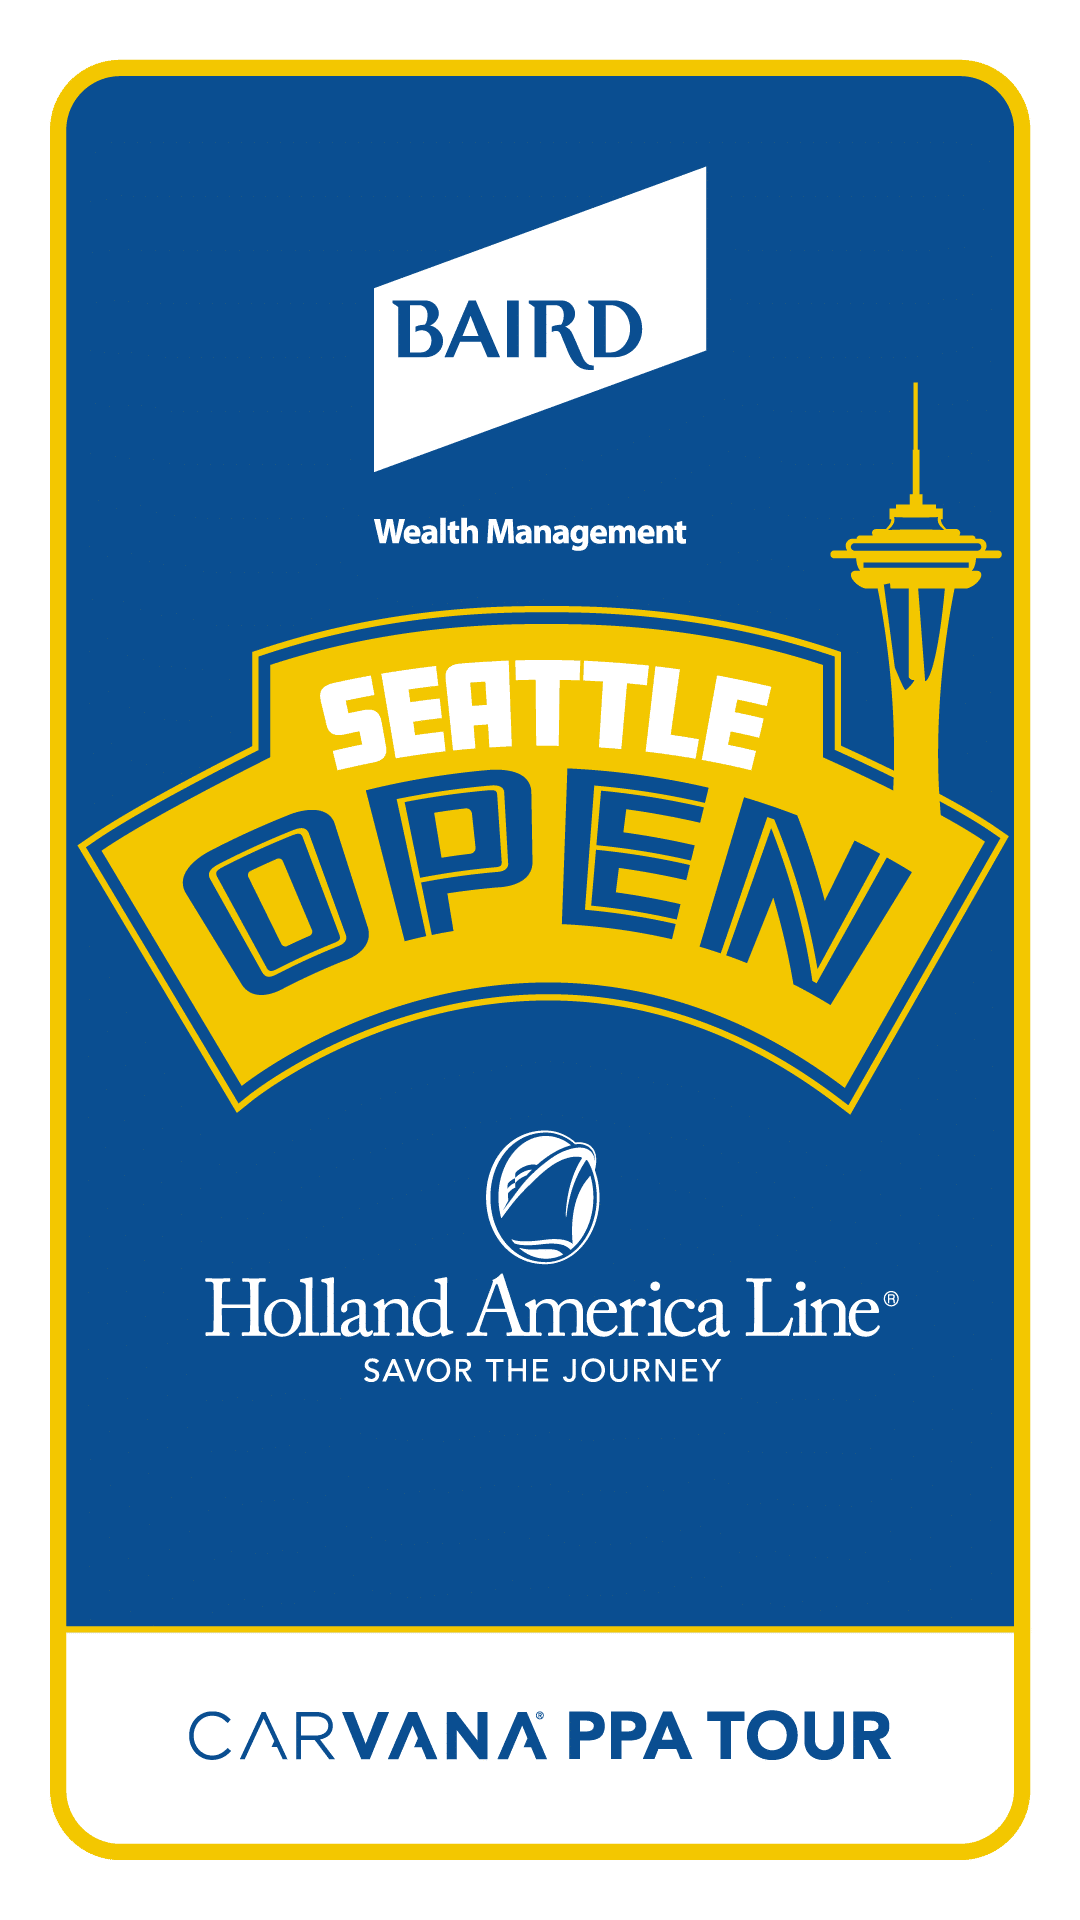 Carvana PPA Tour Baird Wealth Management Open Presented by Holland America Line Tournament Logo PNG